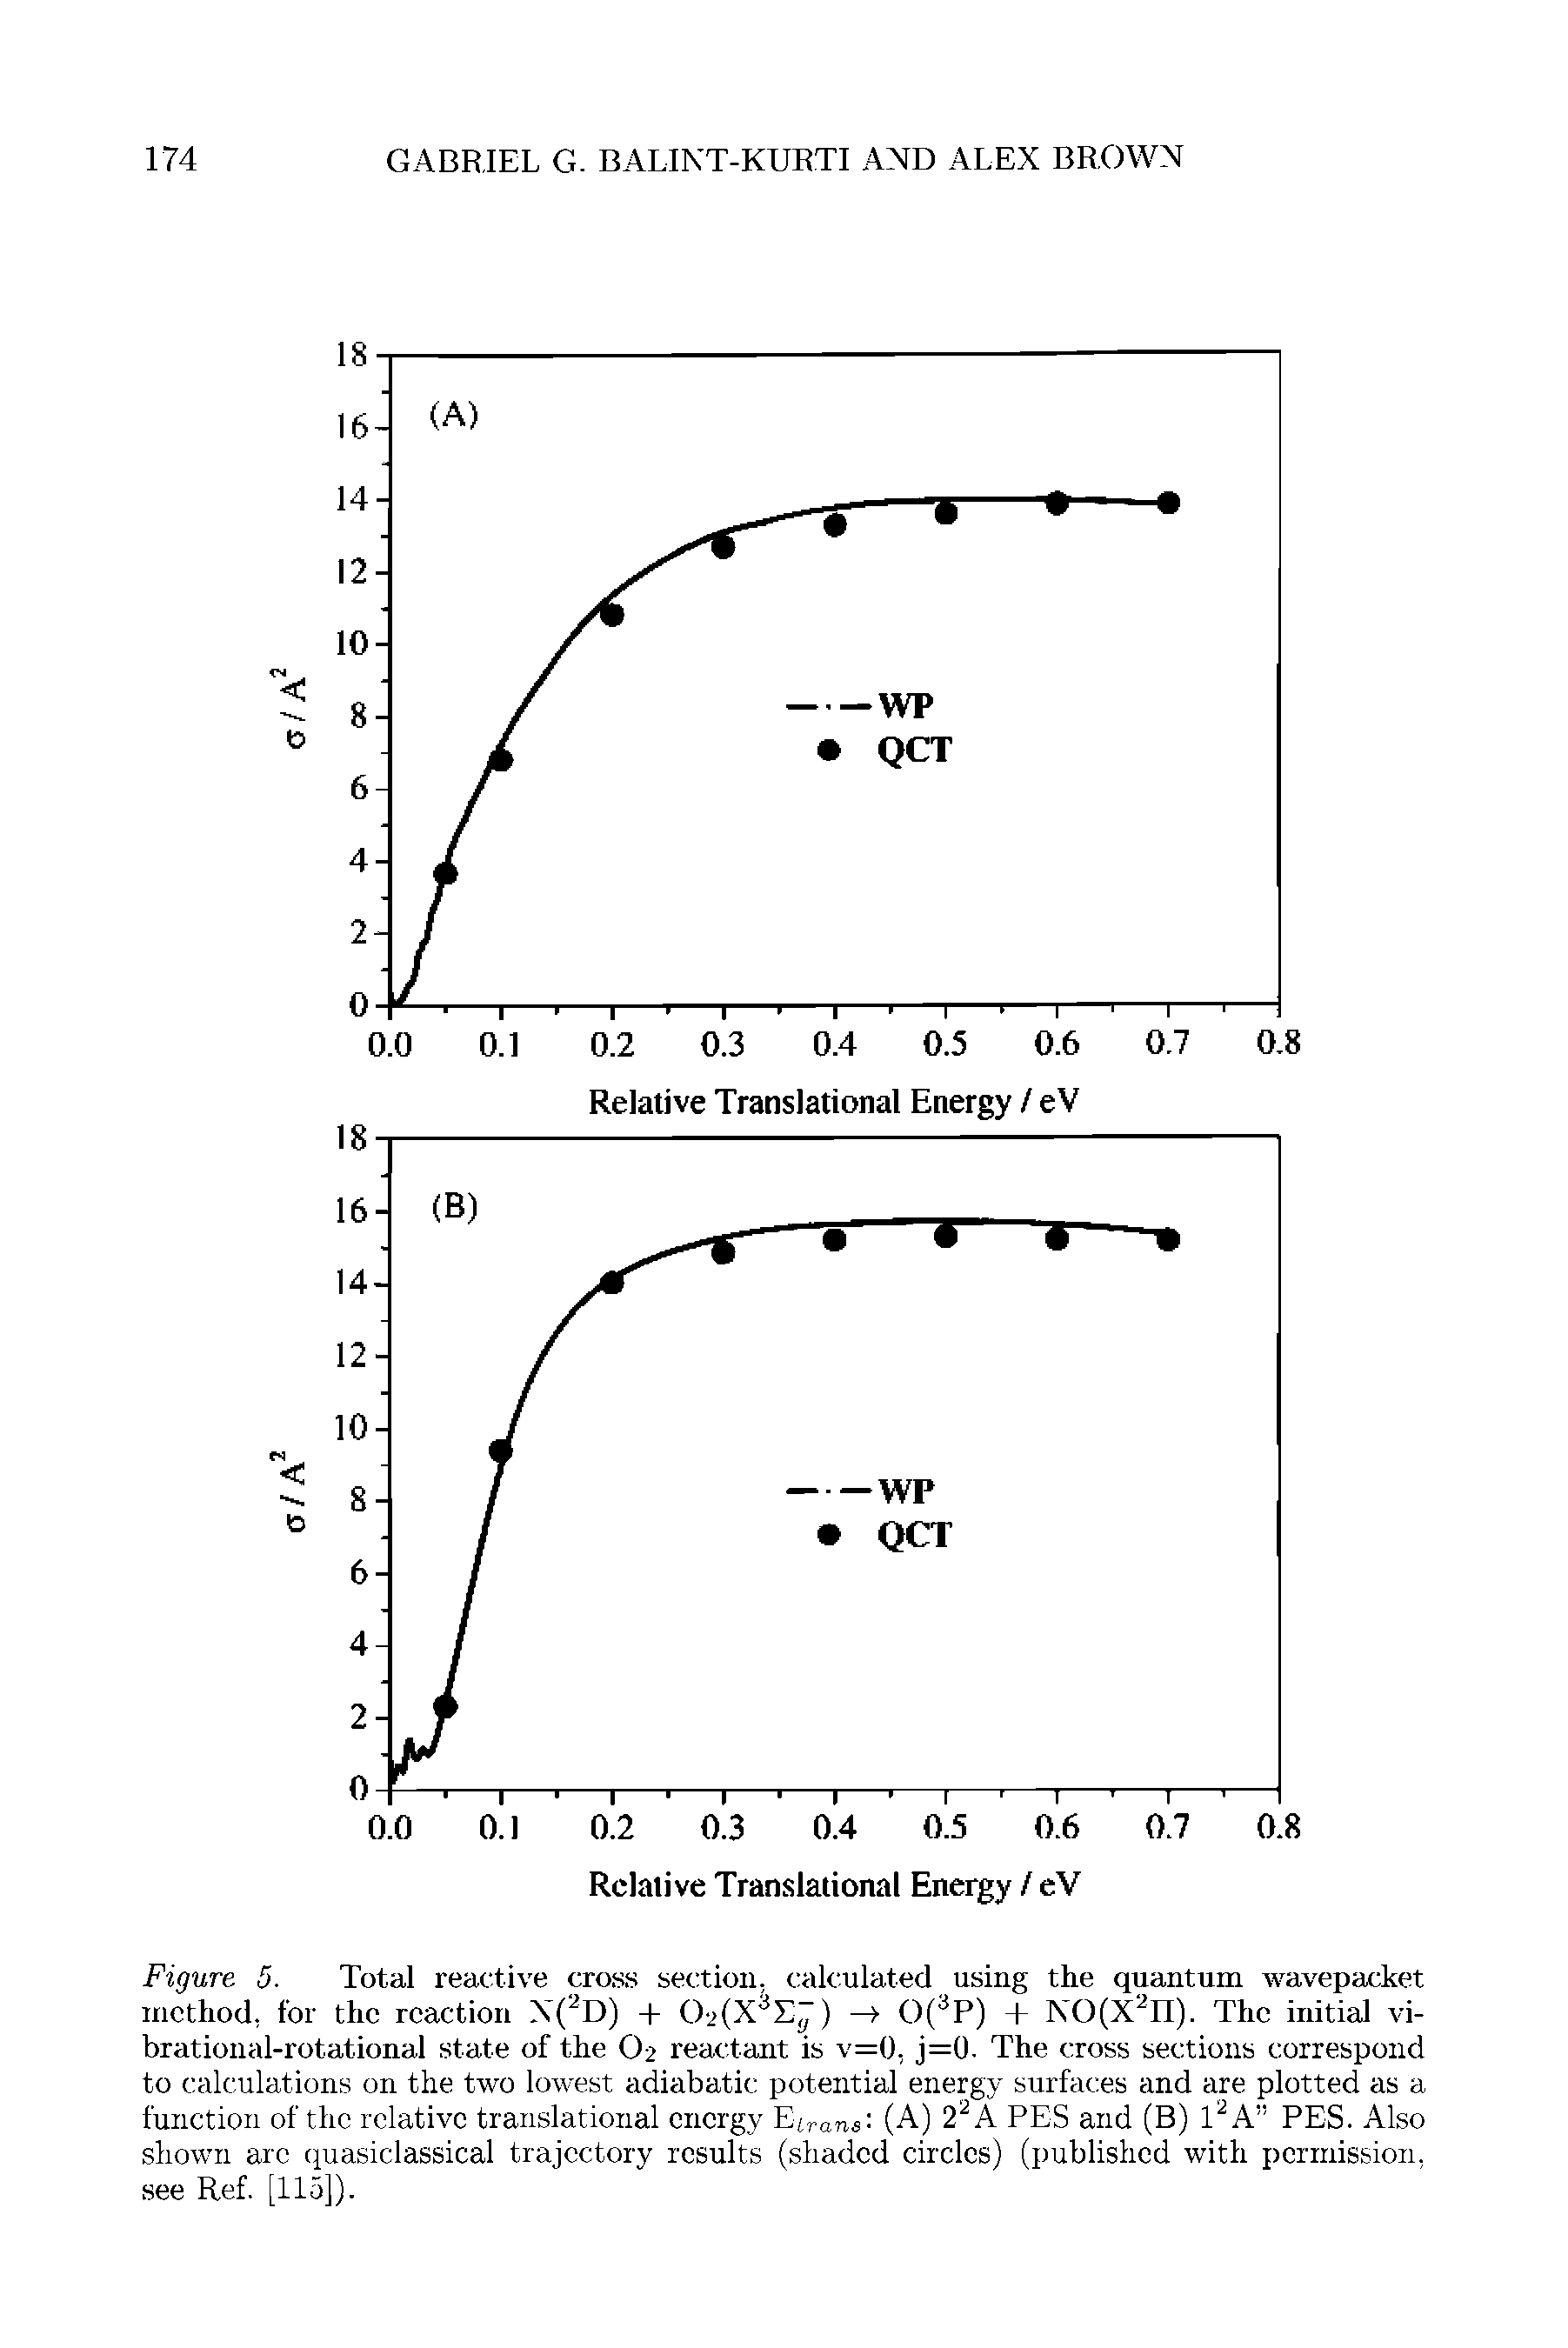 Figure 5. Total reactive cross section, calculated using the quantum wavepacket method, for the reaction N( D) + 02(X E ) 0( P) + NO(X n). The initial vi-...